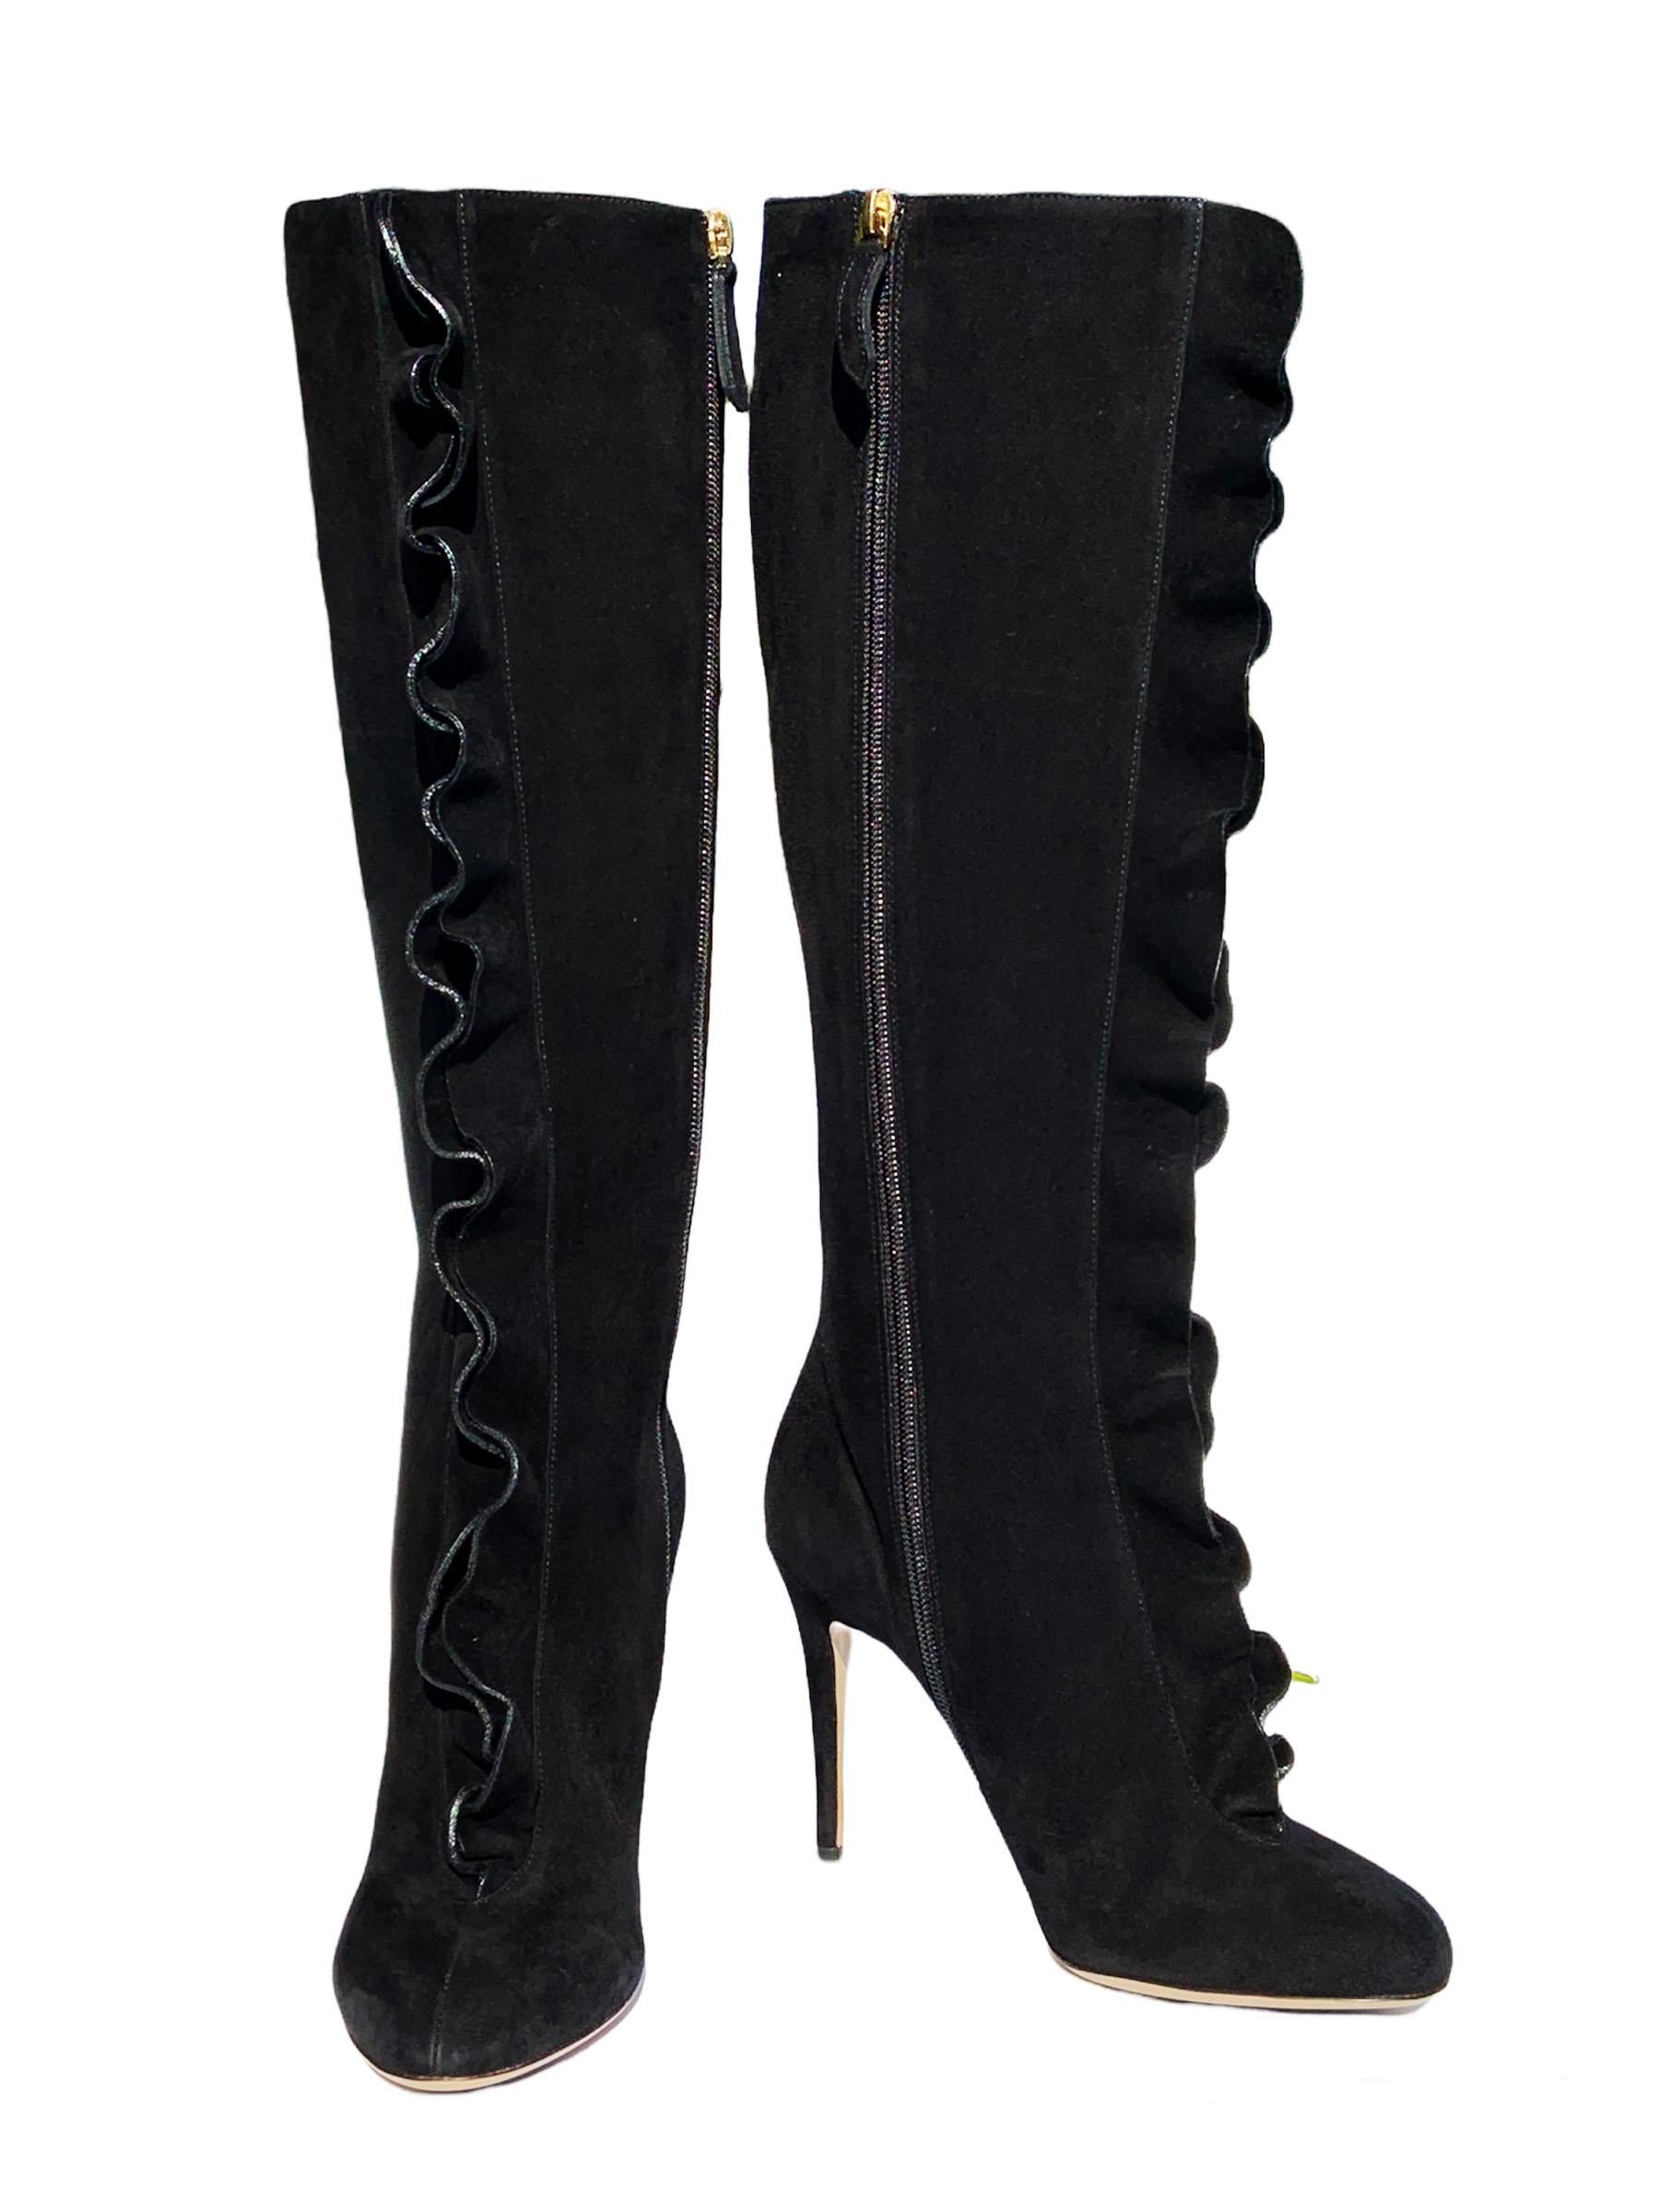 These suede Valentino boots feature a streamlined silhouette, with a textural double-ruffled front. 
Black suede upper, Two ruffles trim front, To-the-knee shaft, Round toe.
Side zipper for ease of dress. 4 inches covered heel.
Made in Italy.
New